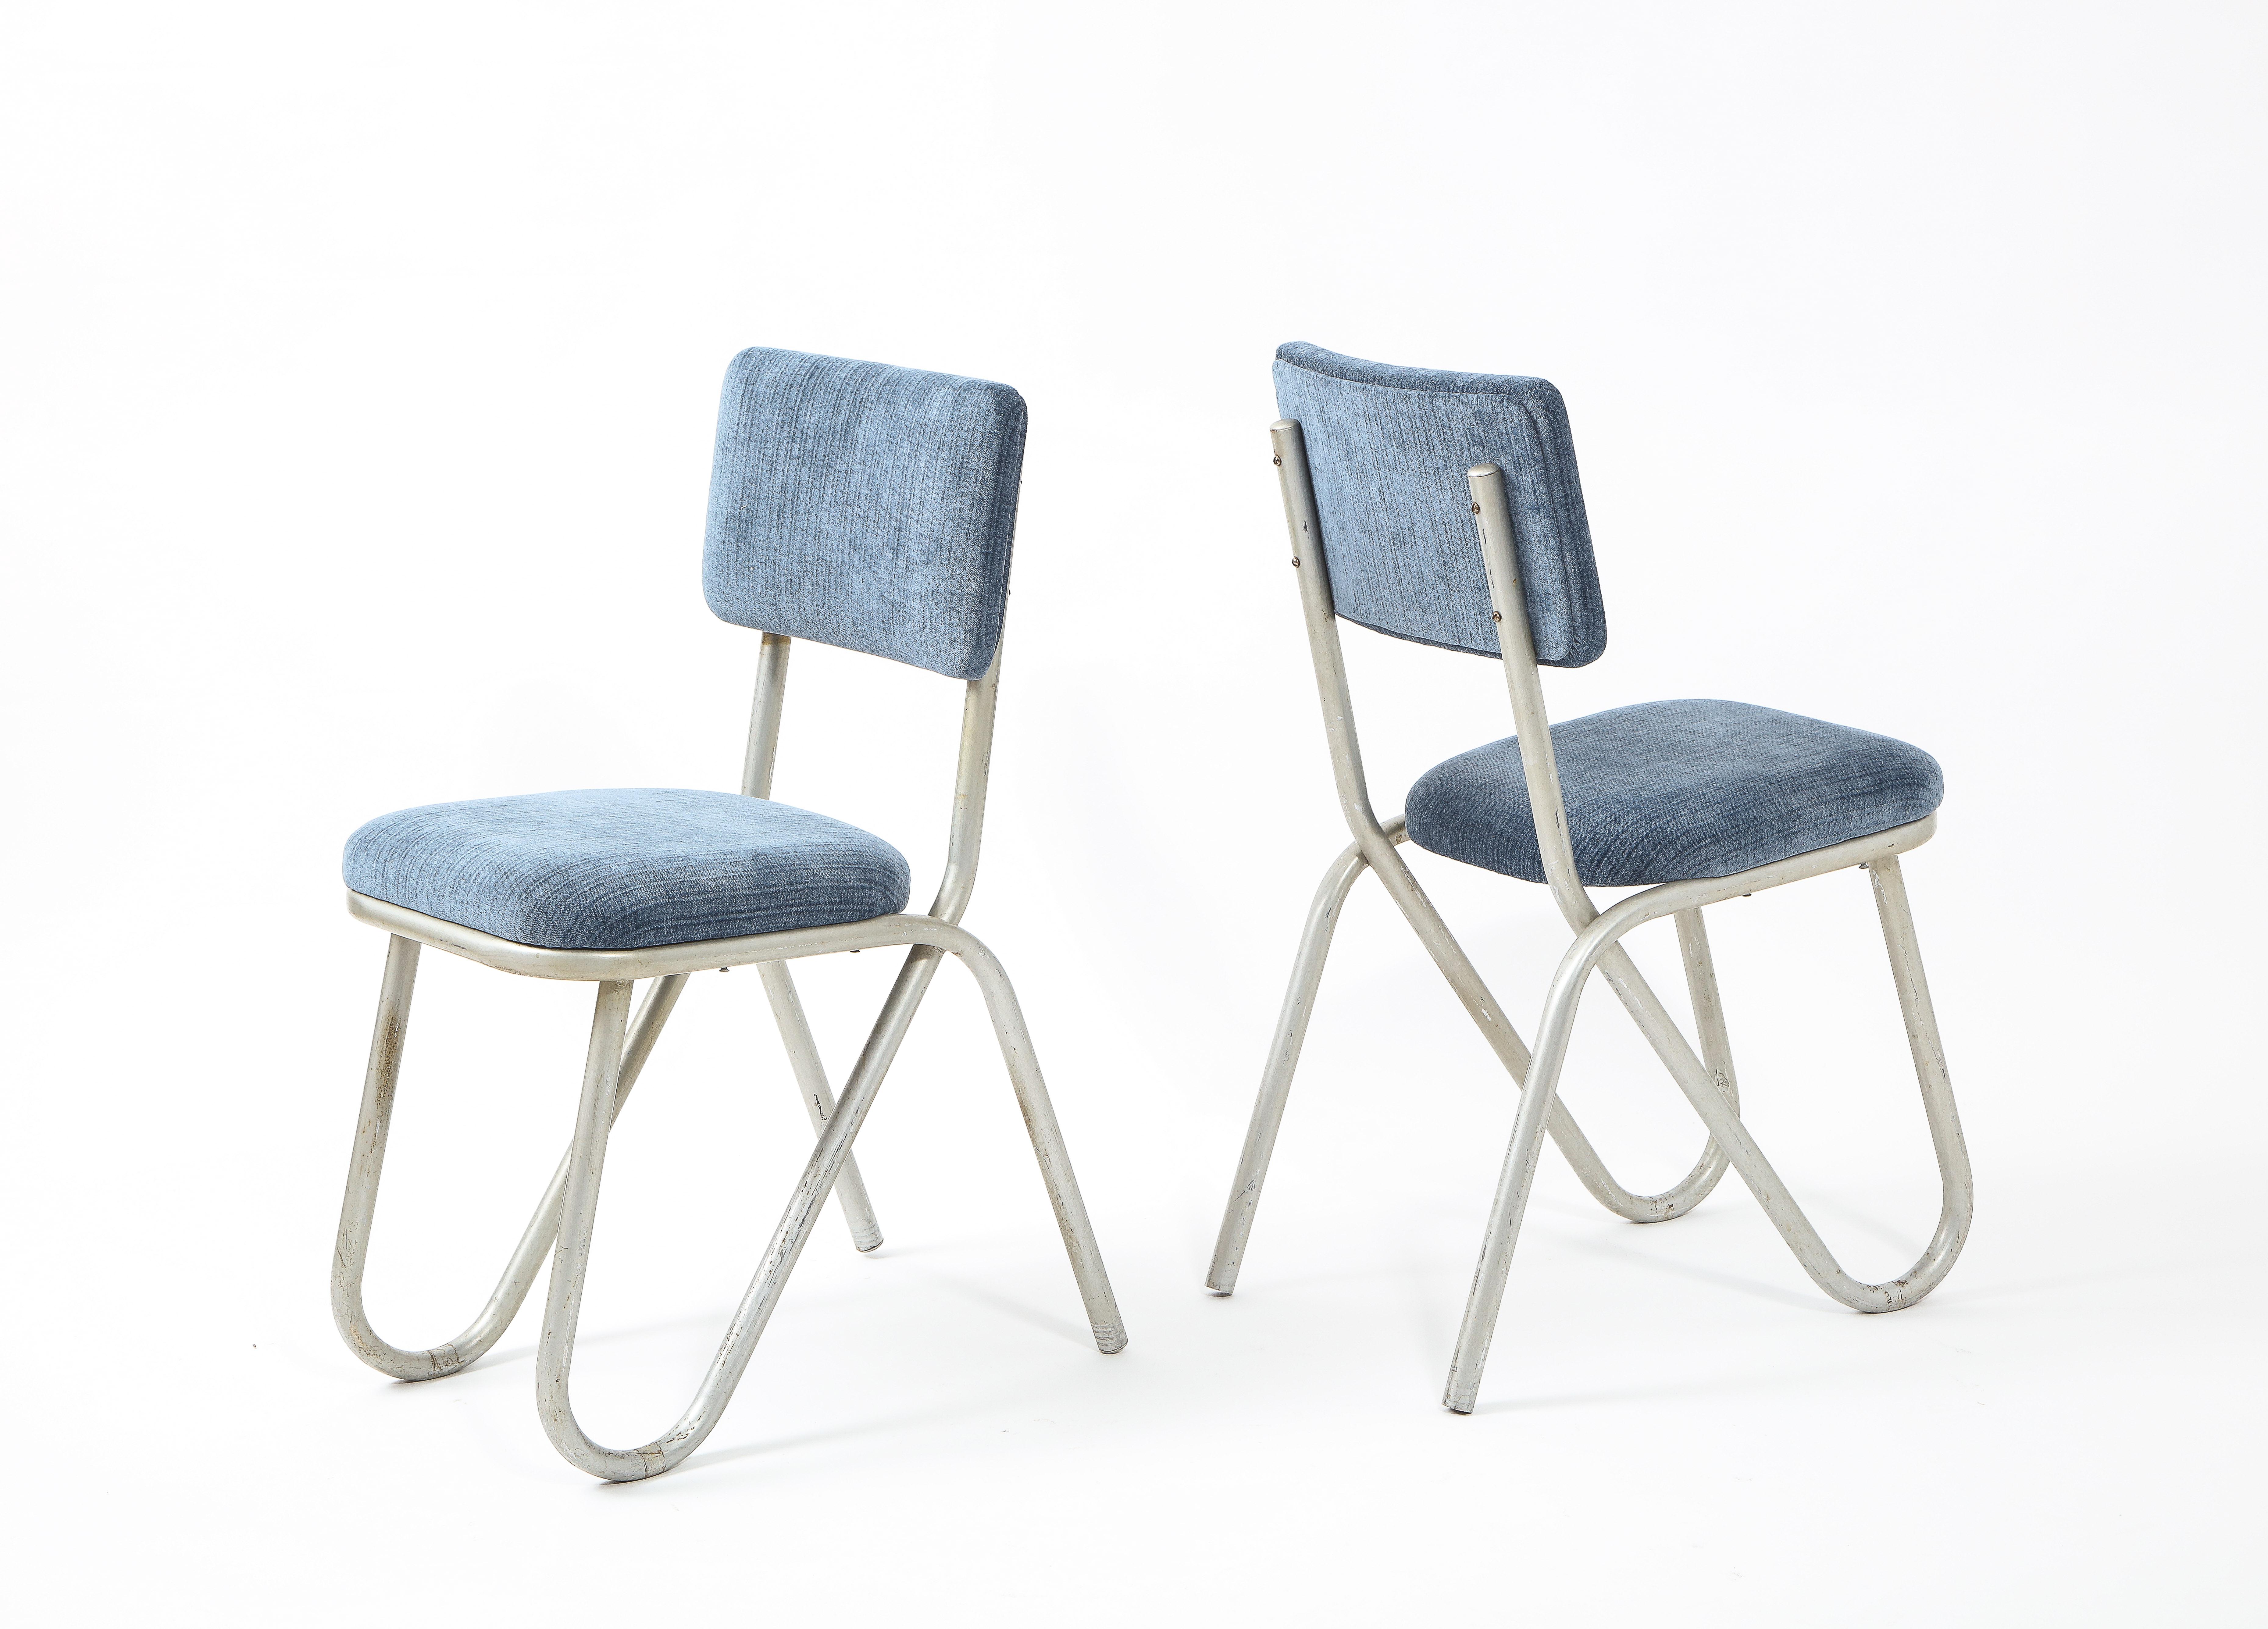 20th Century Pair of Modernist Tubular Metal Side Chairs, France 1950's